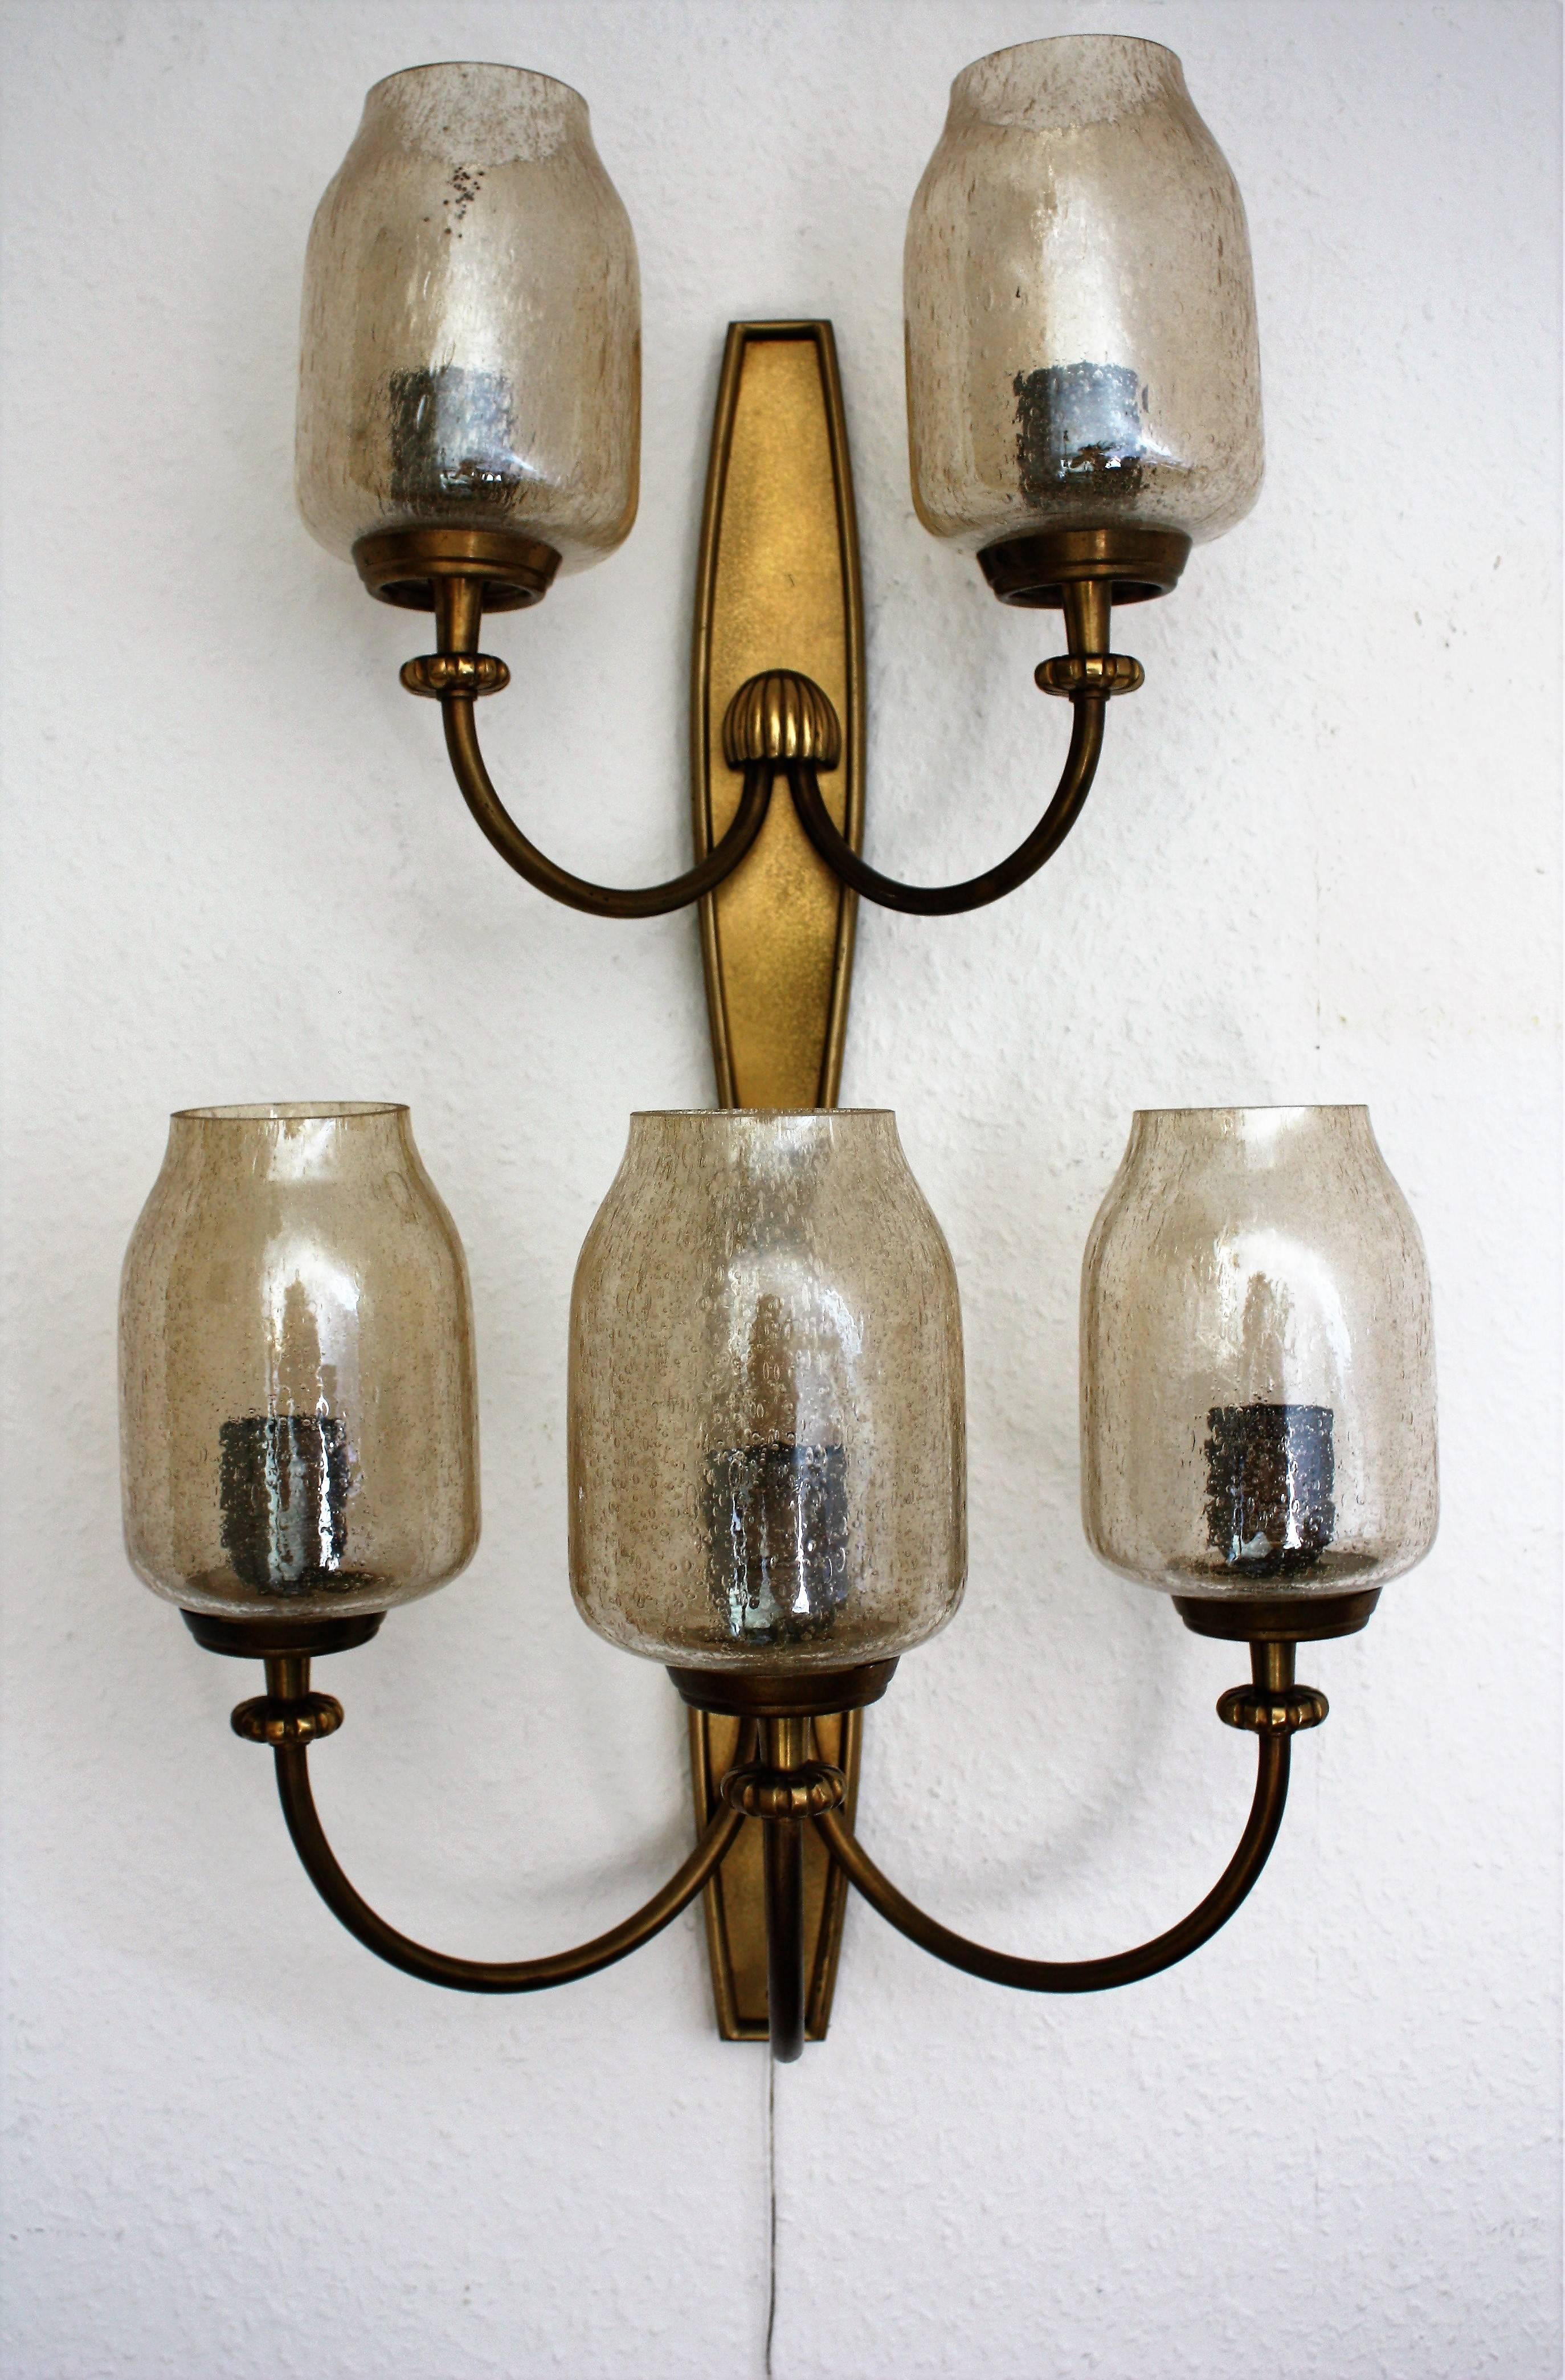 Stunning set of Art Deco brass and glass wall sconces with following measures:
five-light sconce: 24.8" x 16.5"
three -light sconce: 13.3" x 16.5"
two -light sconce: 13.3" x 12.2" (has more patina)
Socket: each E